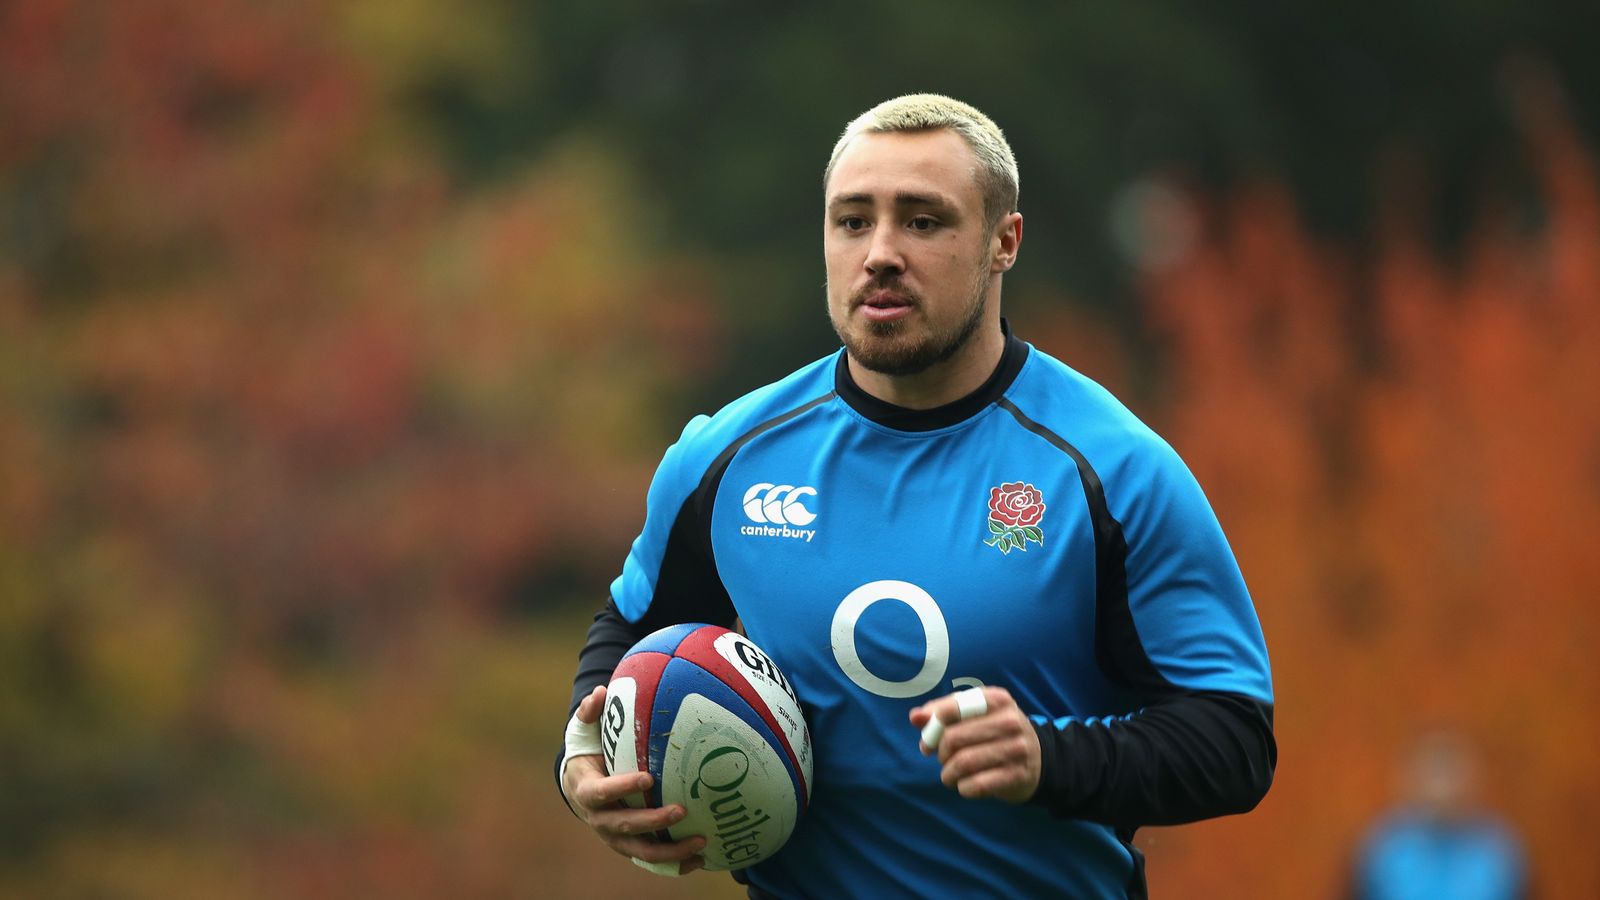 Eddie Jones says Jack Nowell could be an England flanker